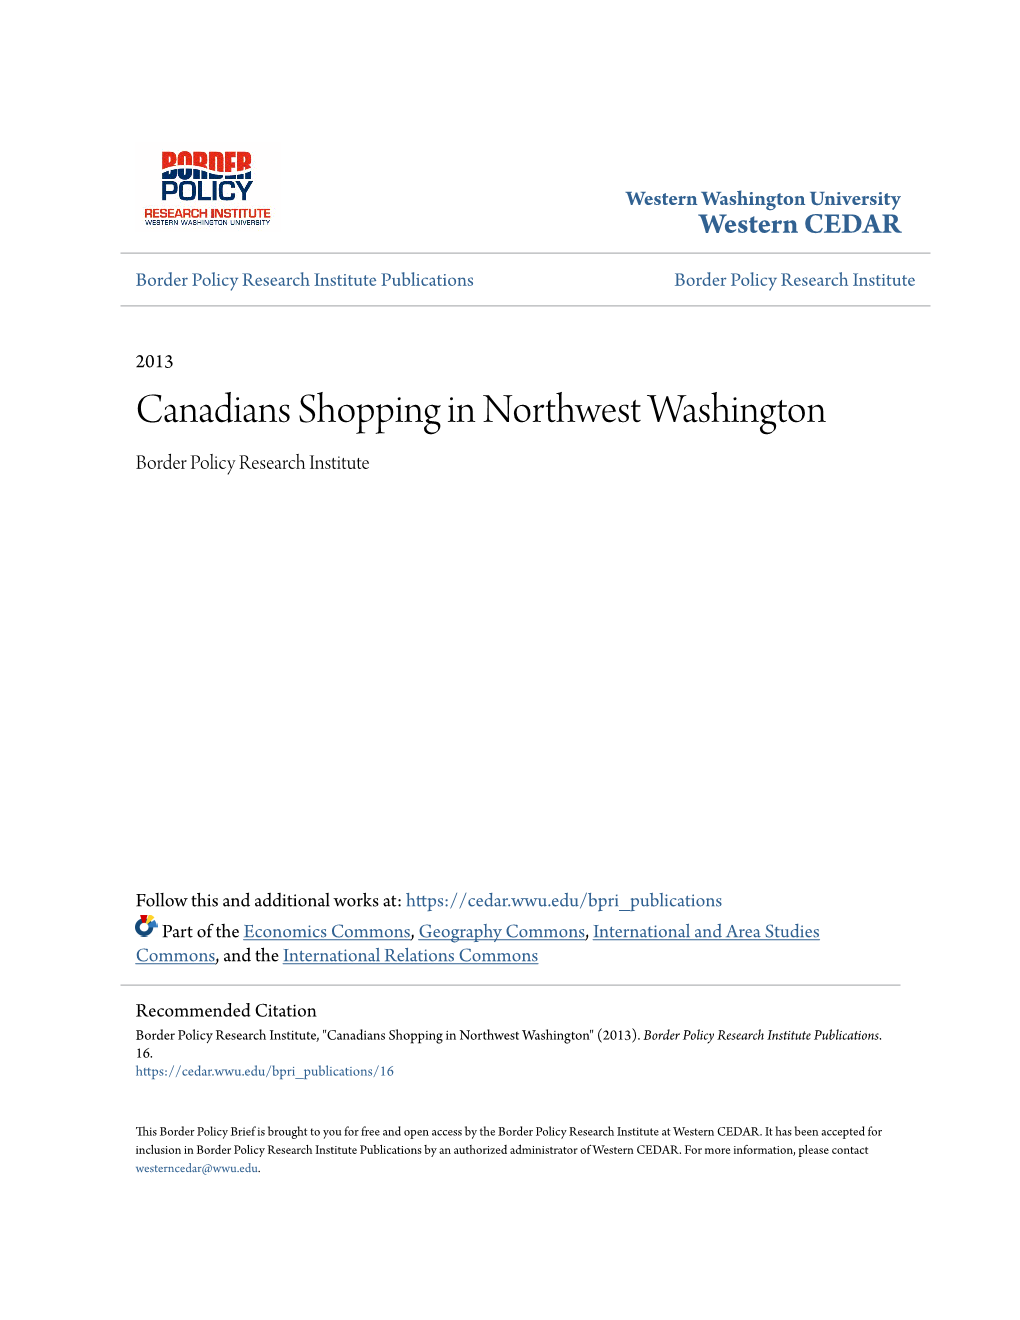 Canadians Shopping in Northwest Washington Border Policy Research Institute